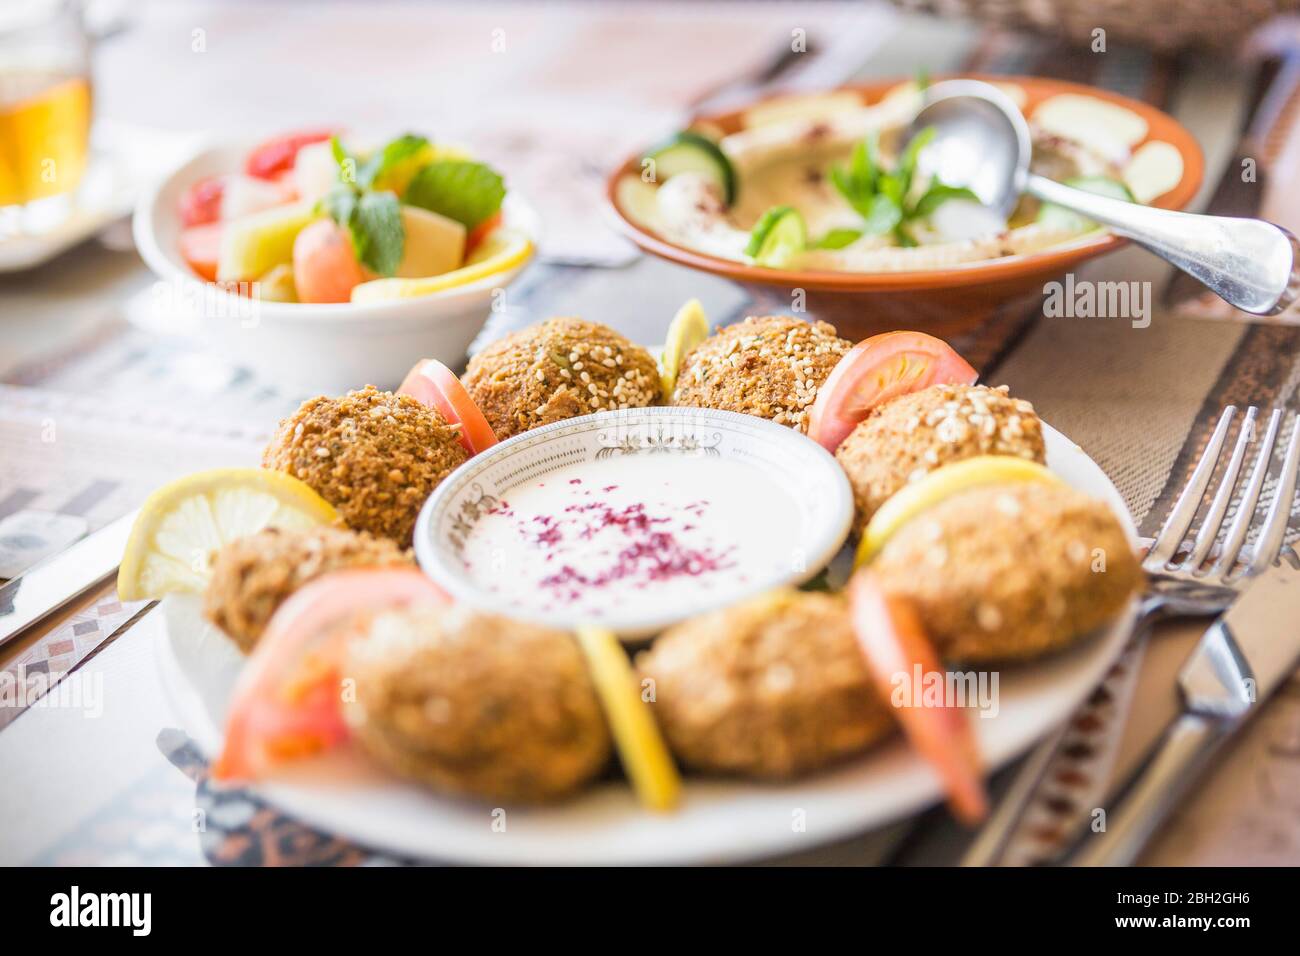 Oman, Plate of Middle Eastern food Stock Photo